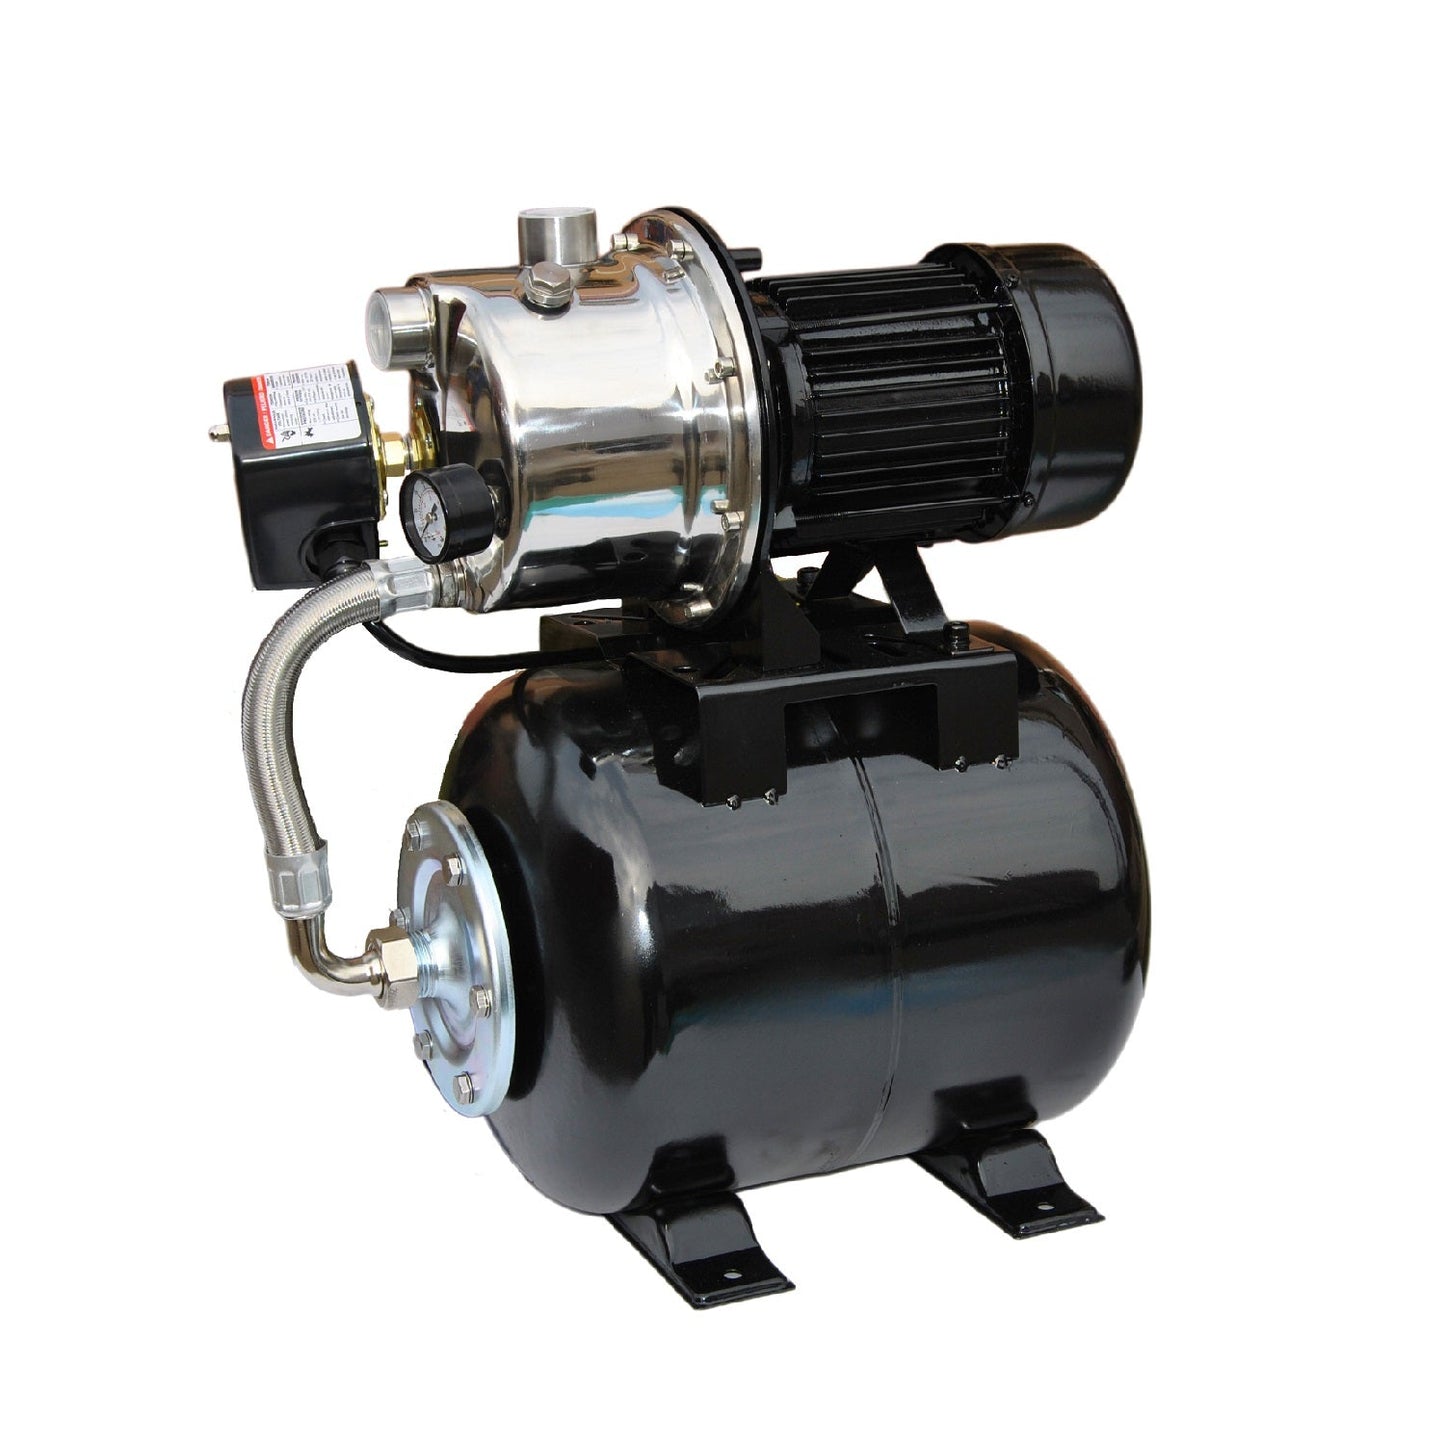 3/4 HP Stainless Steel Well Pump